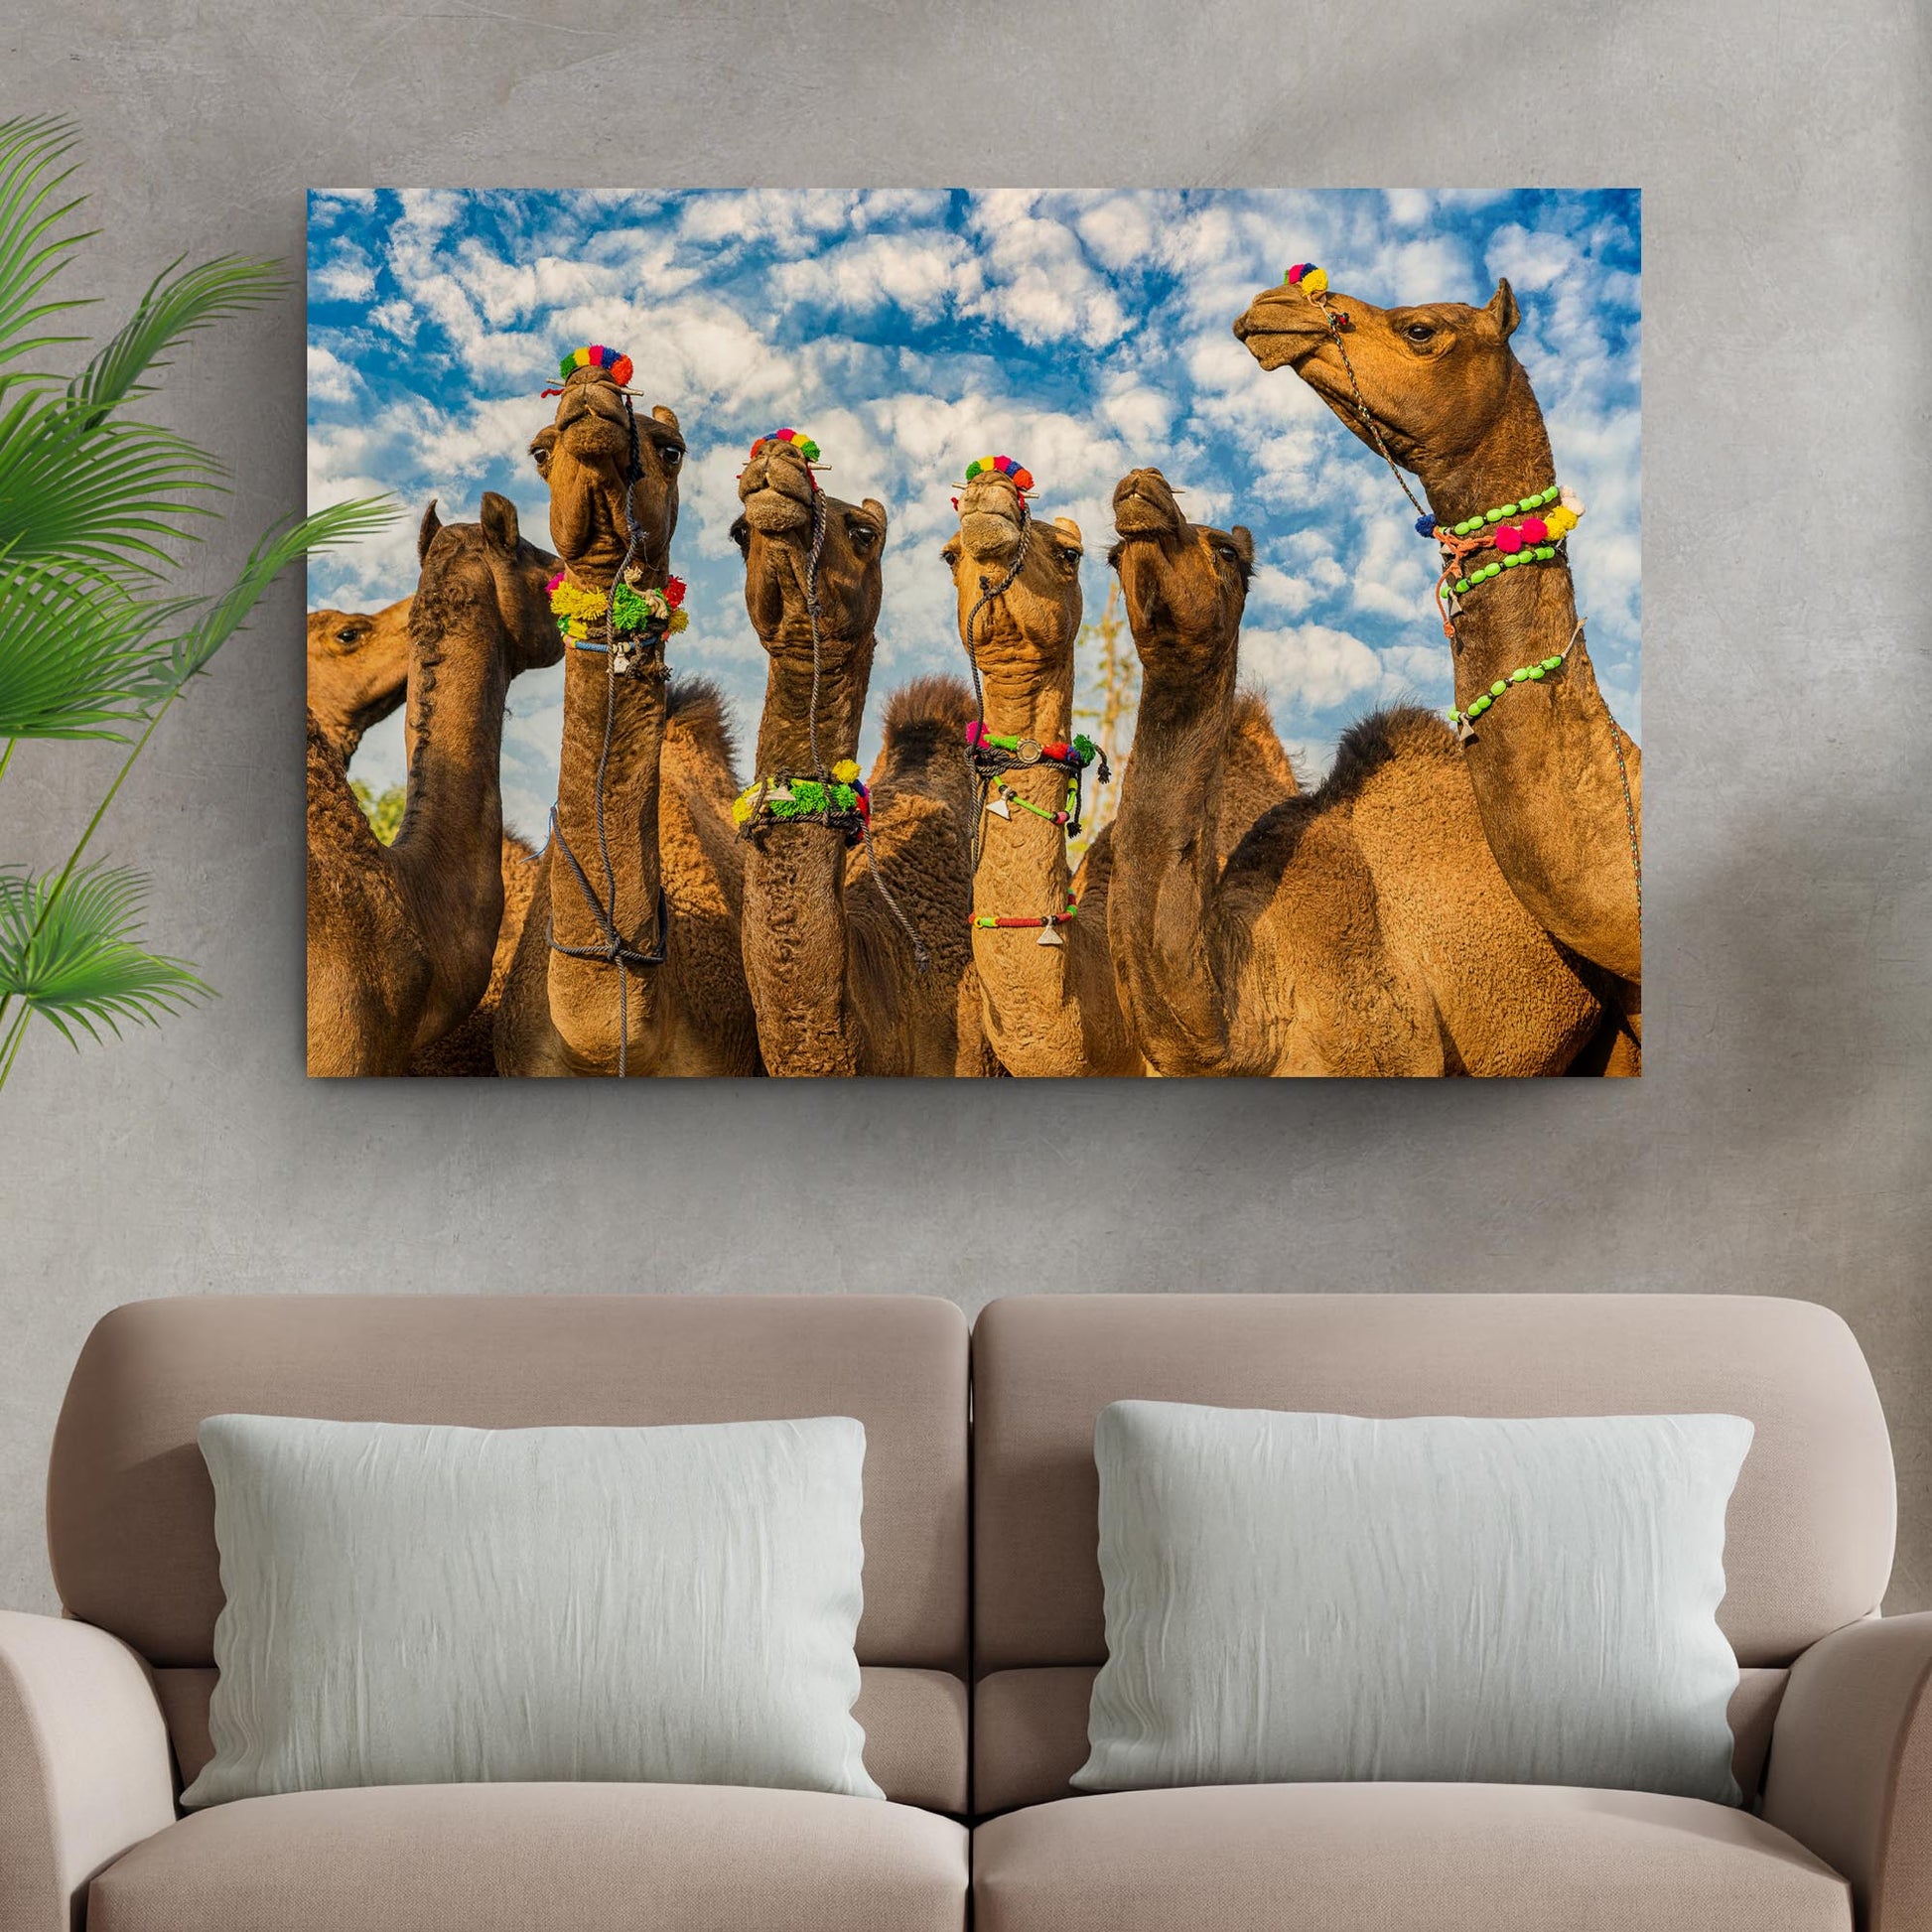 Pushkar Fair Camels Canvas Wall Art Style 2 - Image by Tailored Canvases